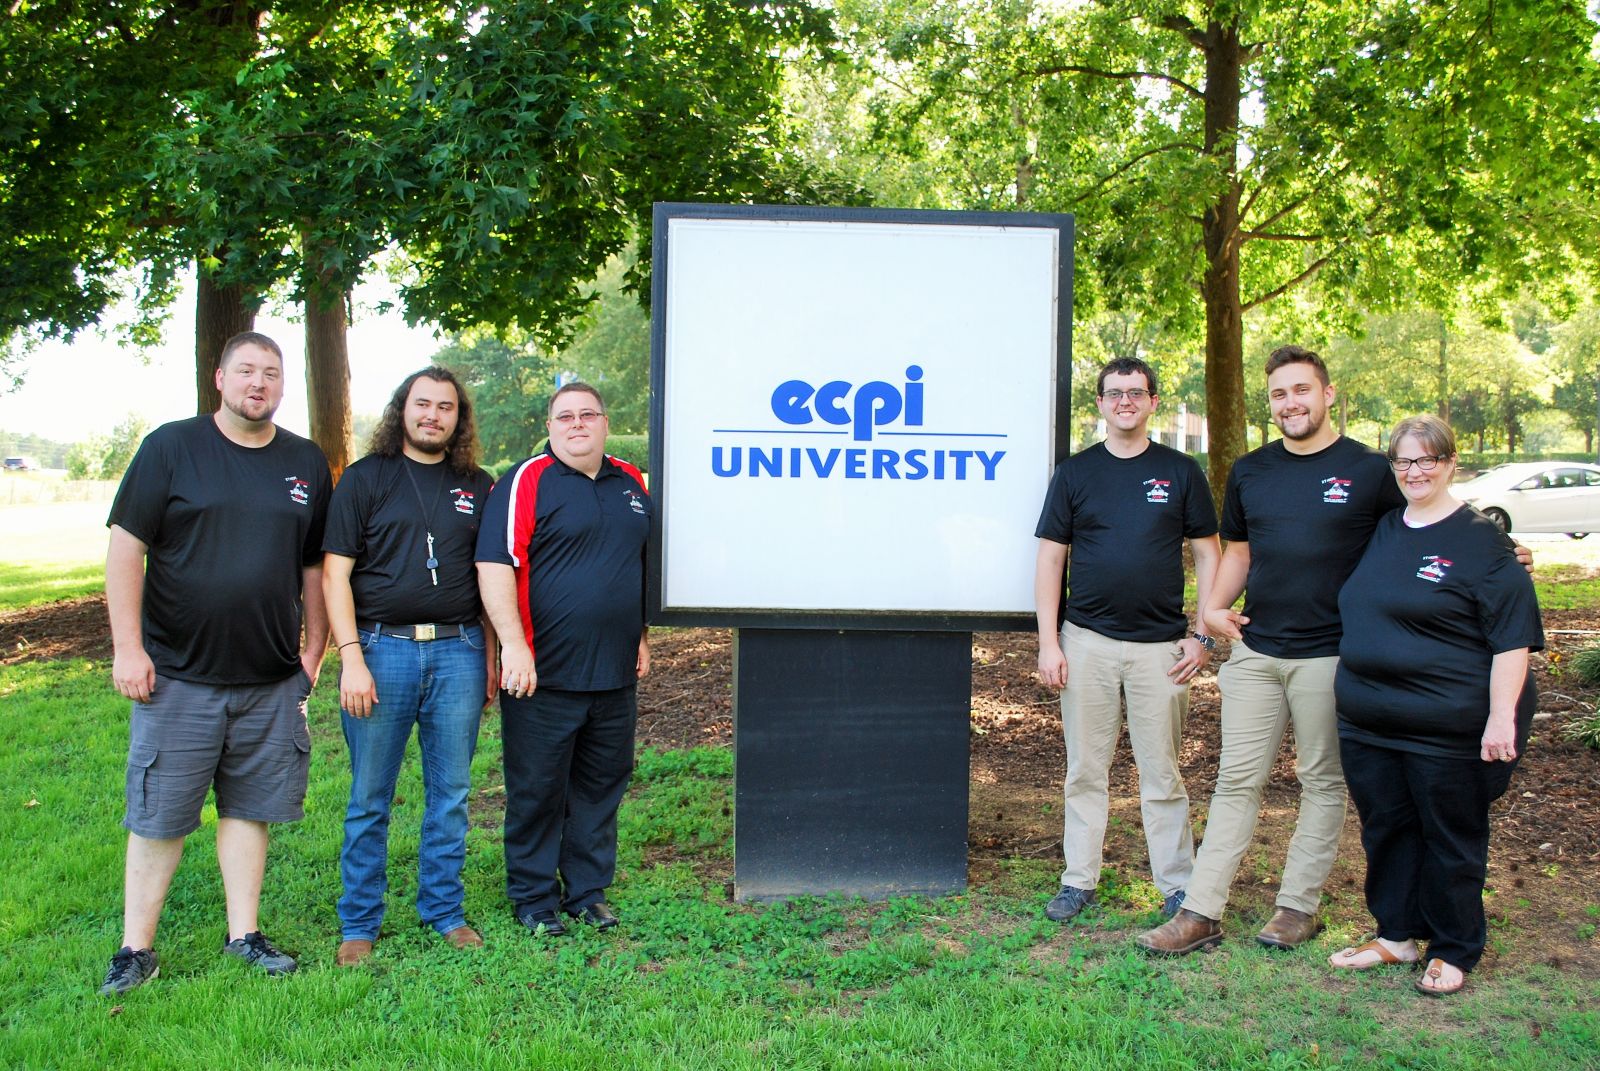 The ECPI Cybersecurity Team is competing in the national finals of a cyber skills competition. (Photo/Provided)